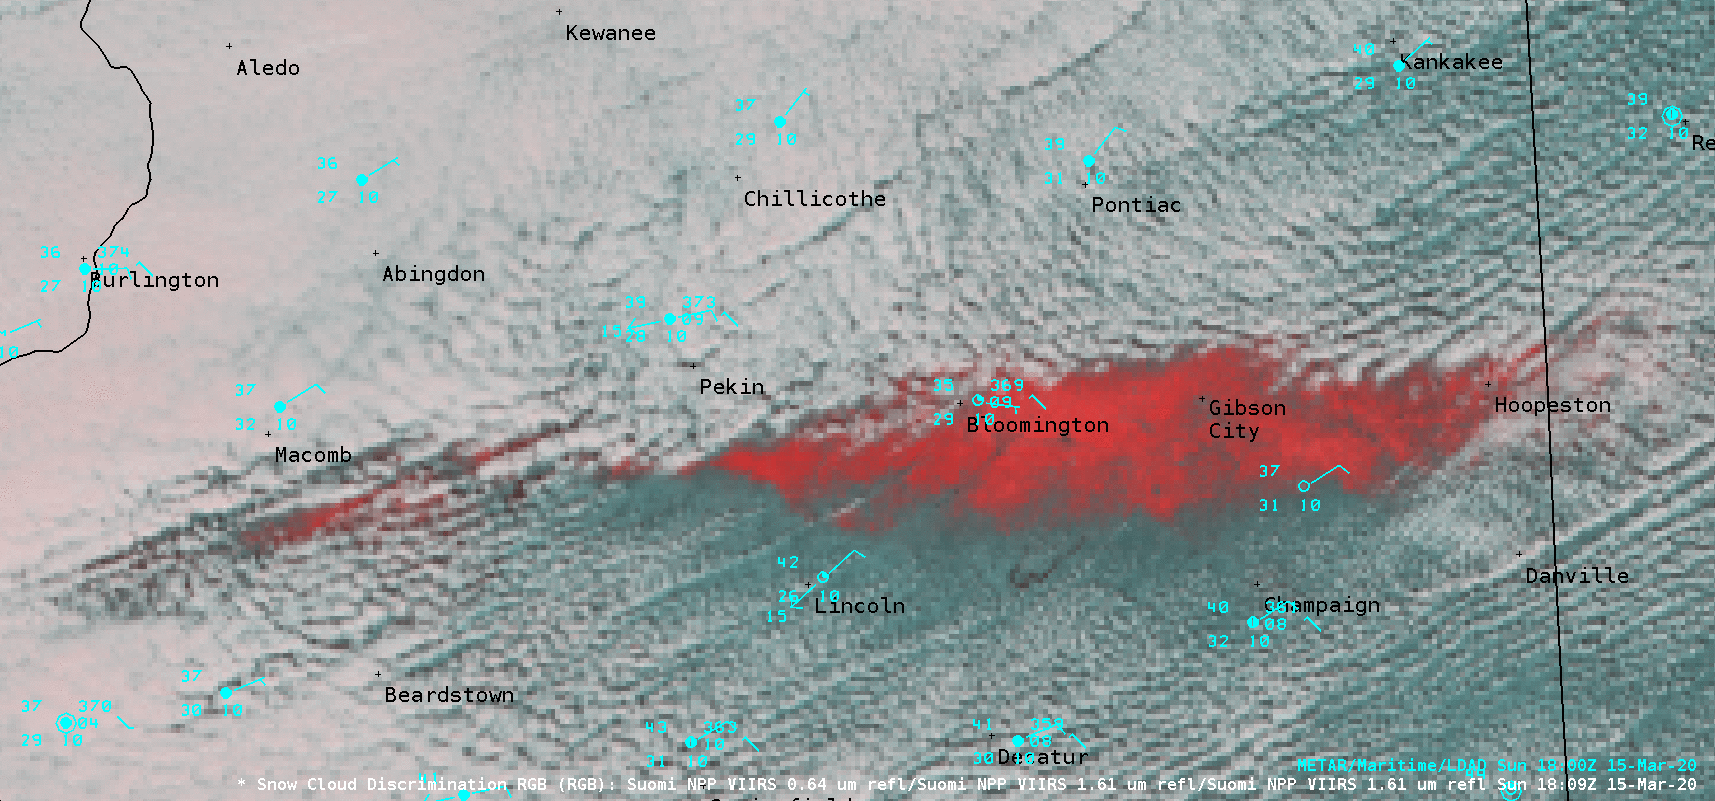 VIIRS Snow/Cloud Discrimination RGB images from NOAA-20 and Suomi NPP [click to enlarge]